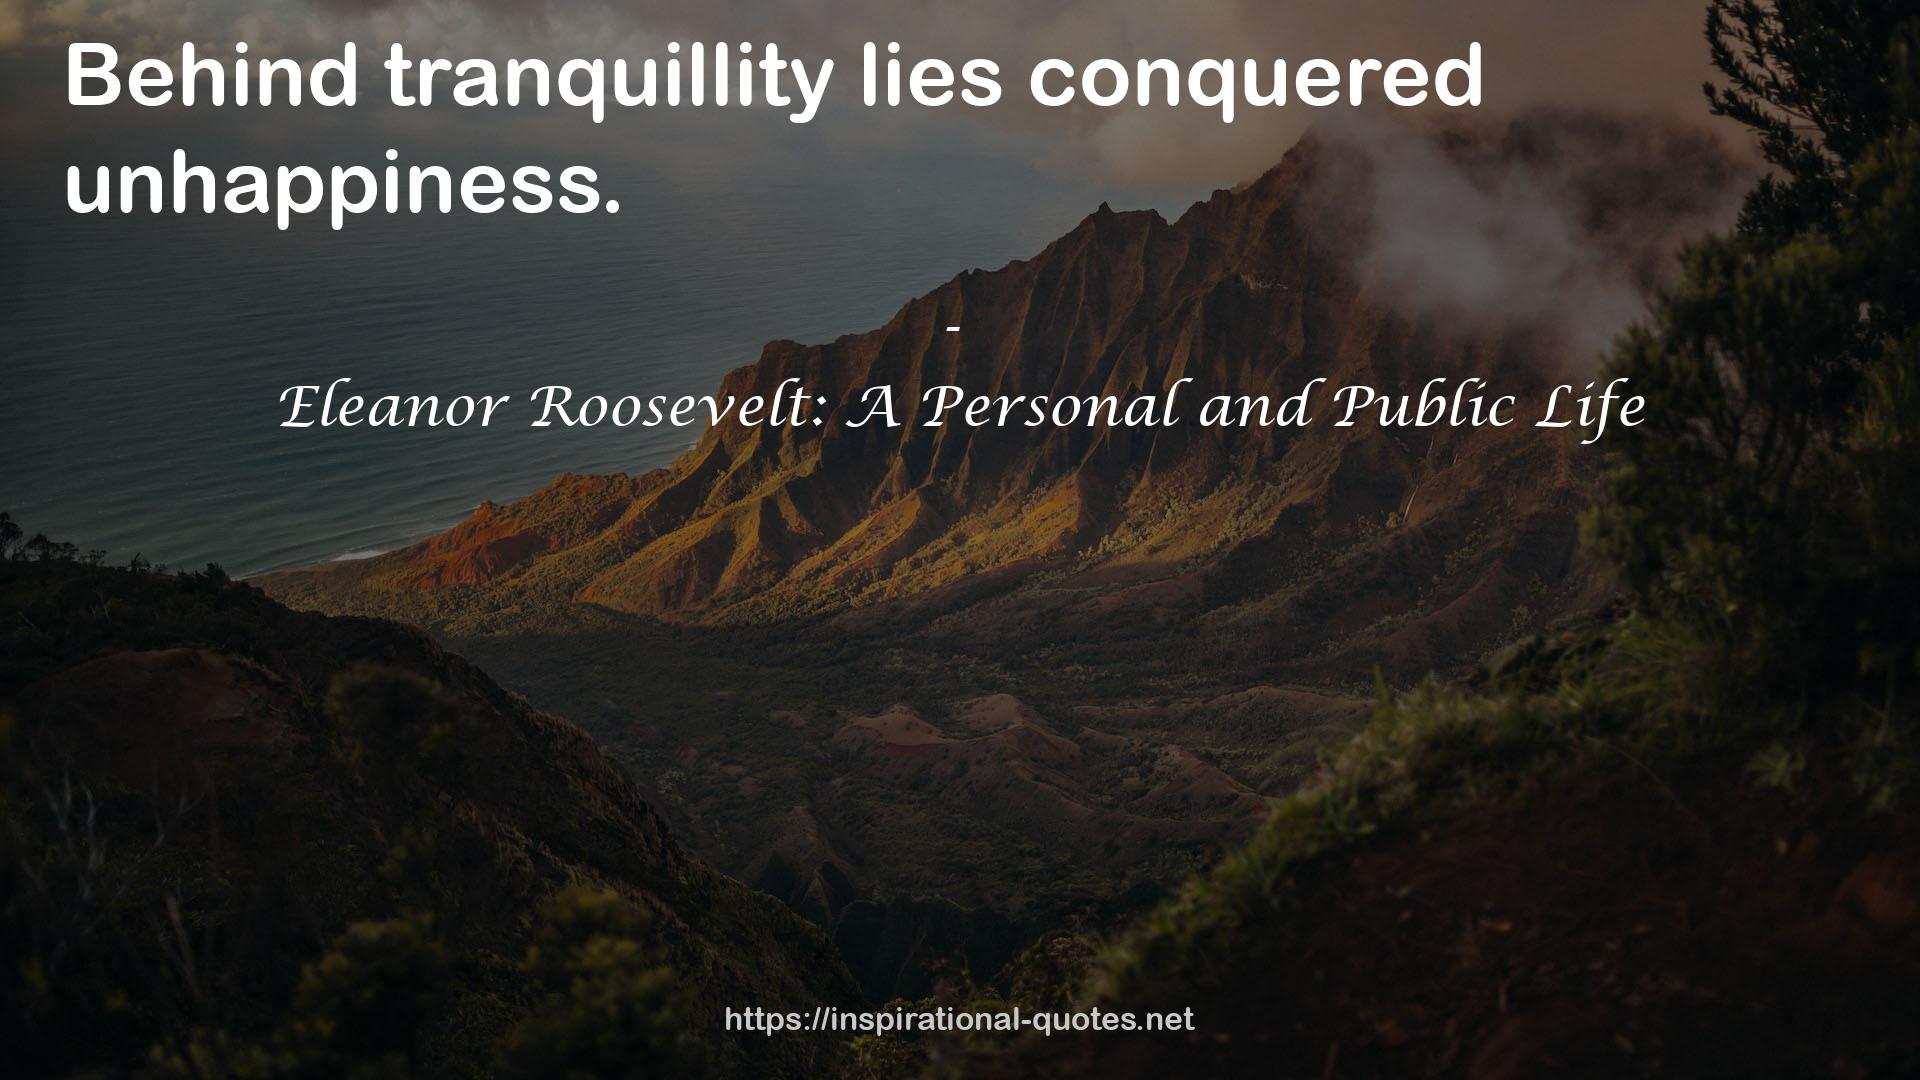 Eleanor Roosevelt: A Personal and Public Life QUOTES